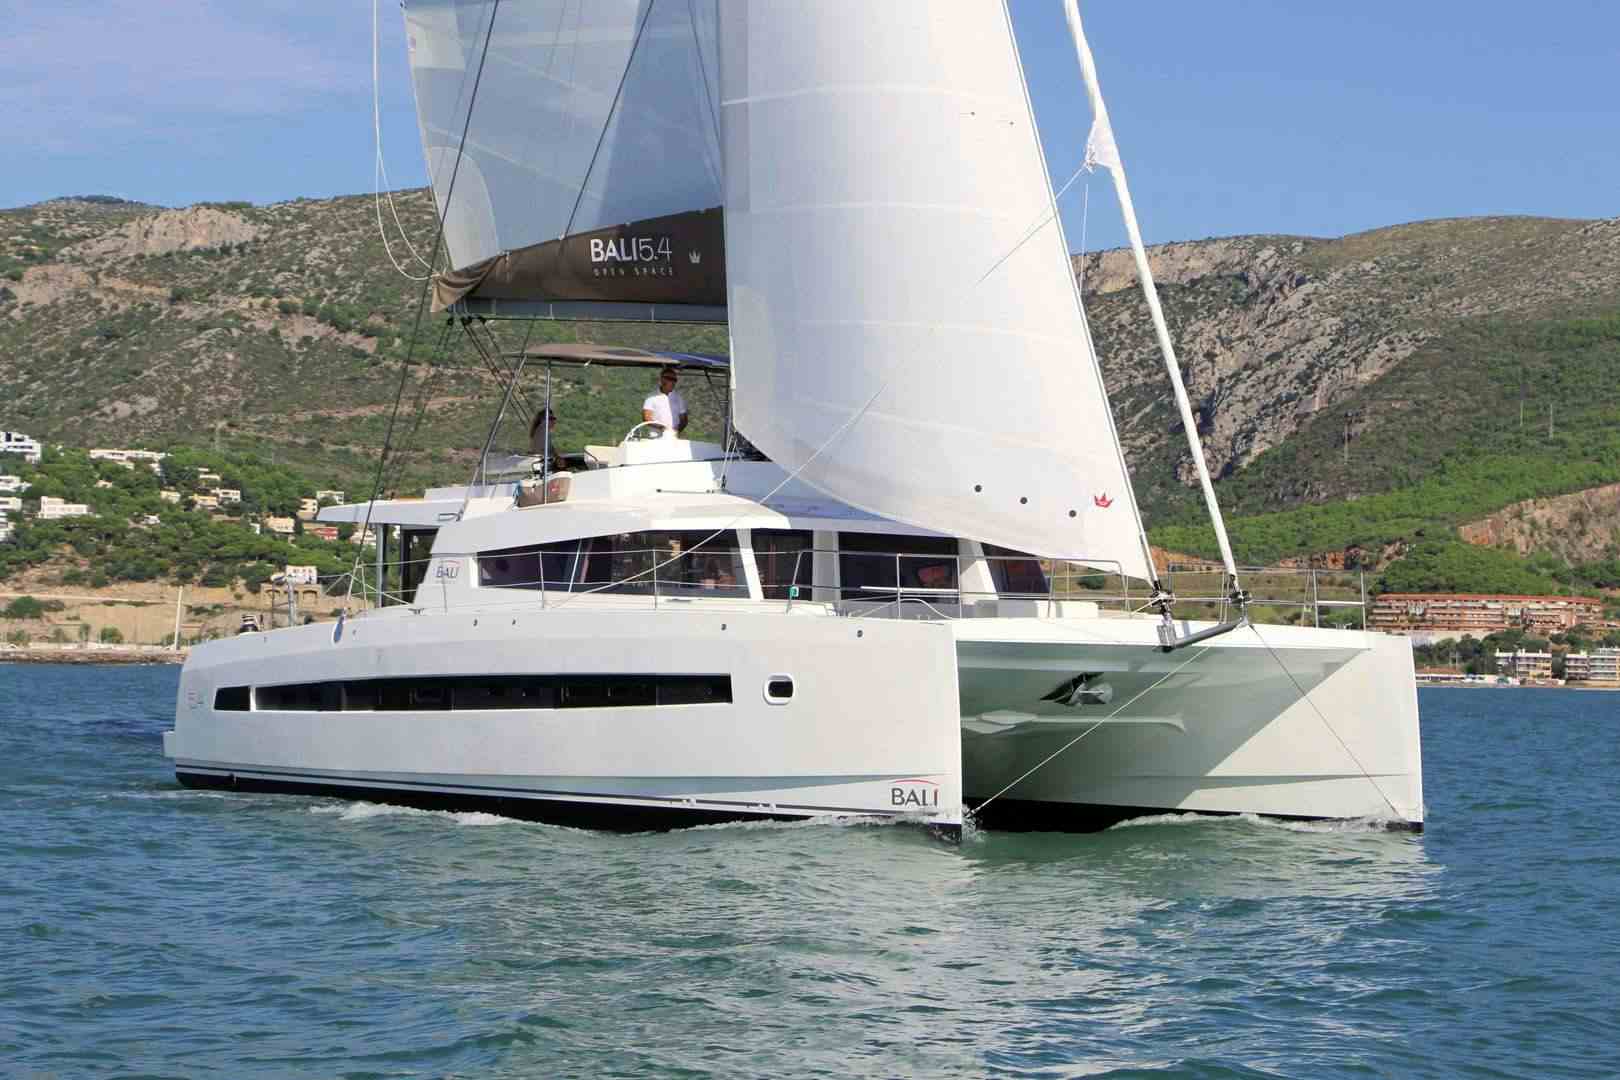 TWO OCEANS - Yacht Charter The Canaries & Boat hire in W. Med - Spain/Balearics, Caribbean Leewards, Caribbean Windwards, Caribbean Virgin Islands (BVI) 1